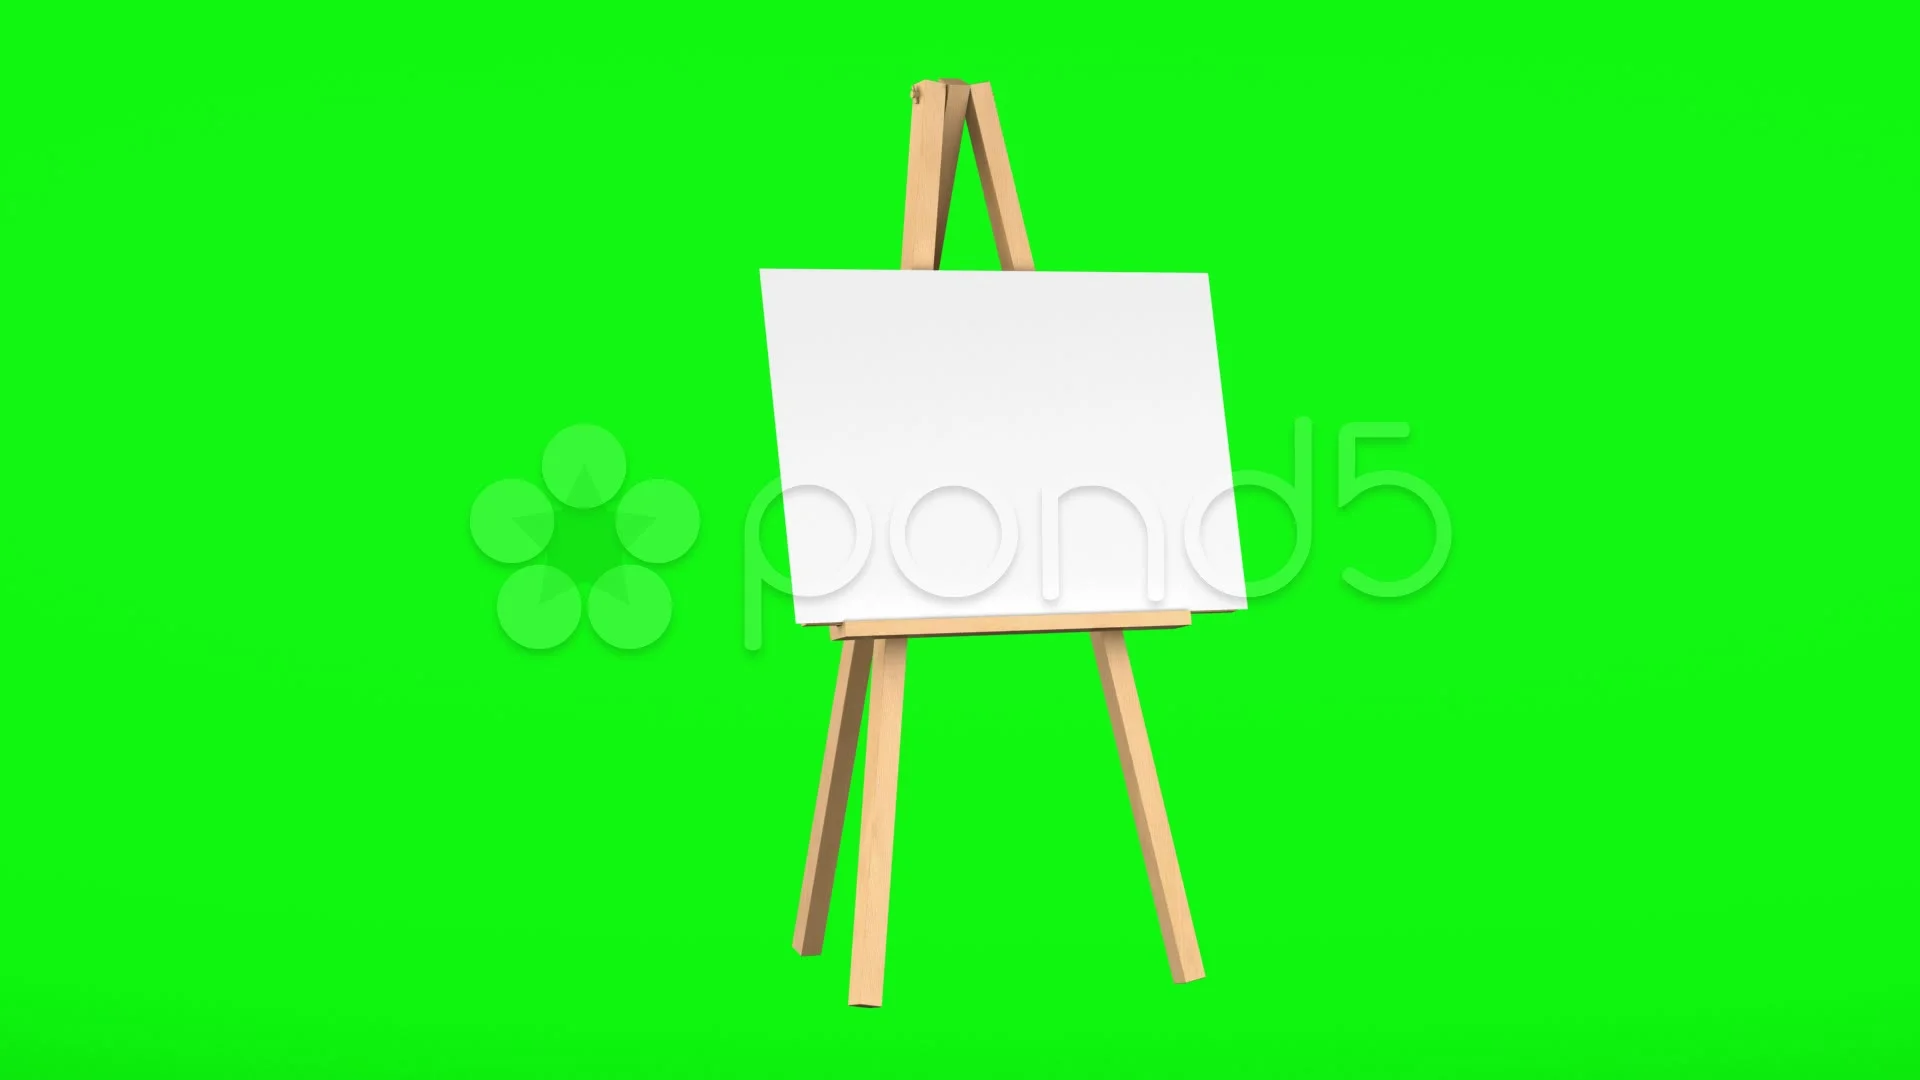 Wall Mural wooden easel with blank canvas 